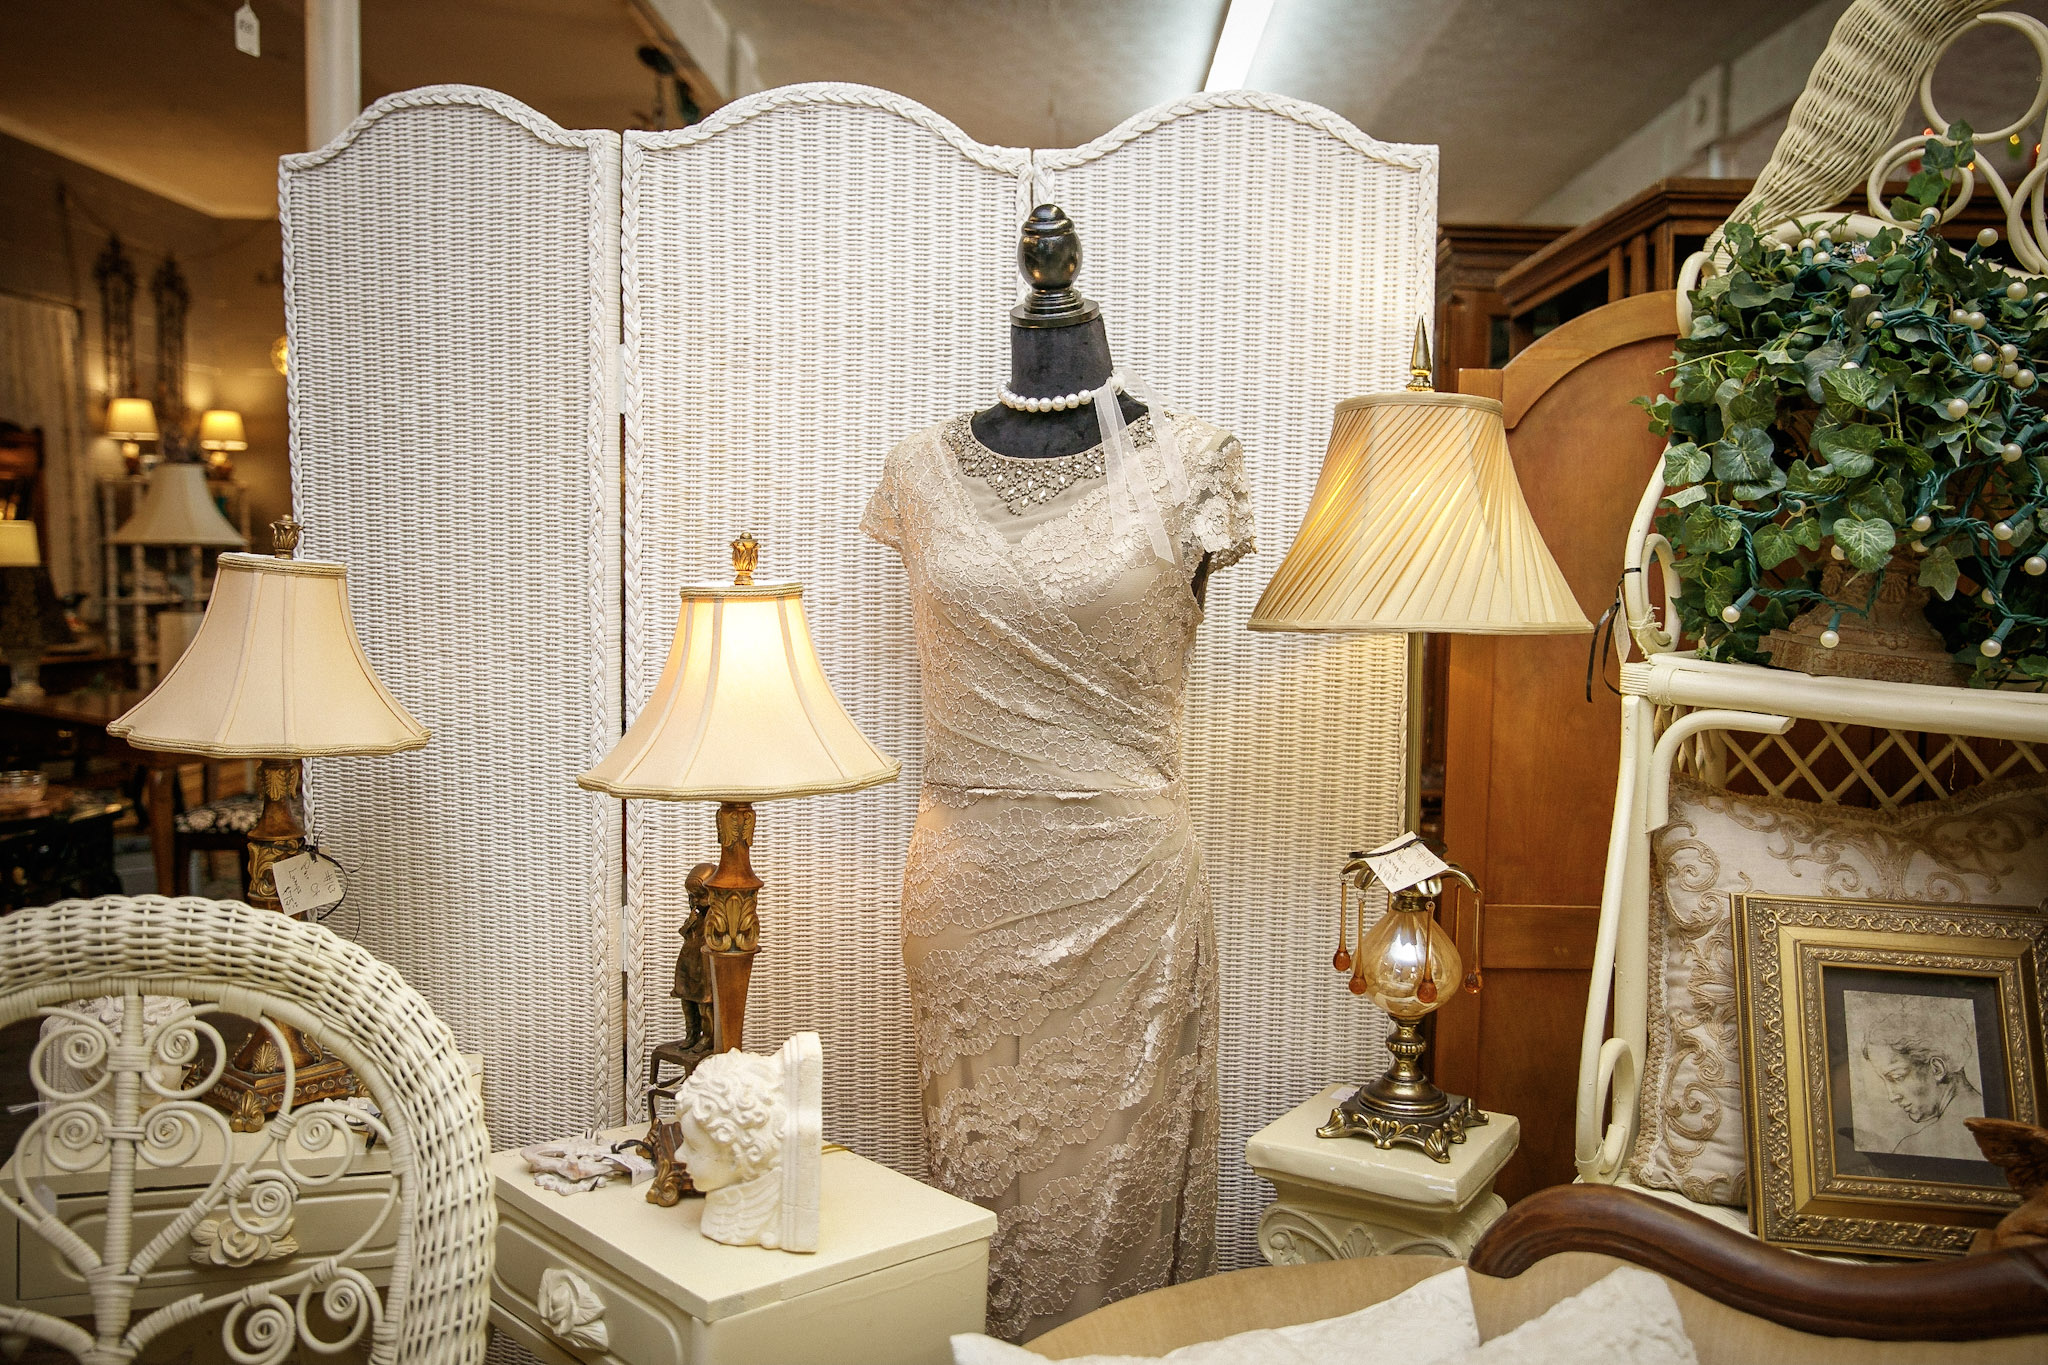 dress and lamps